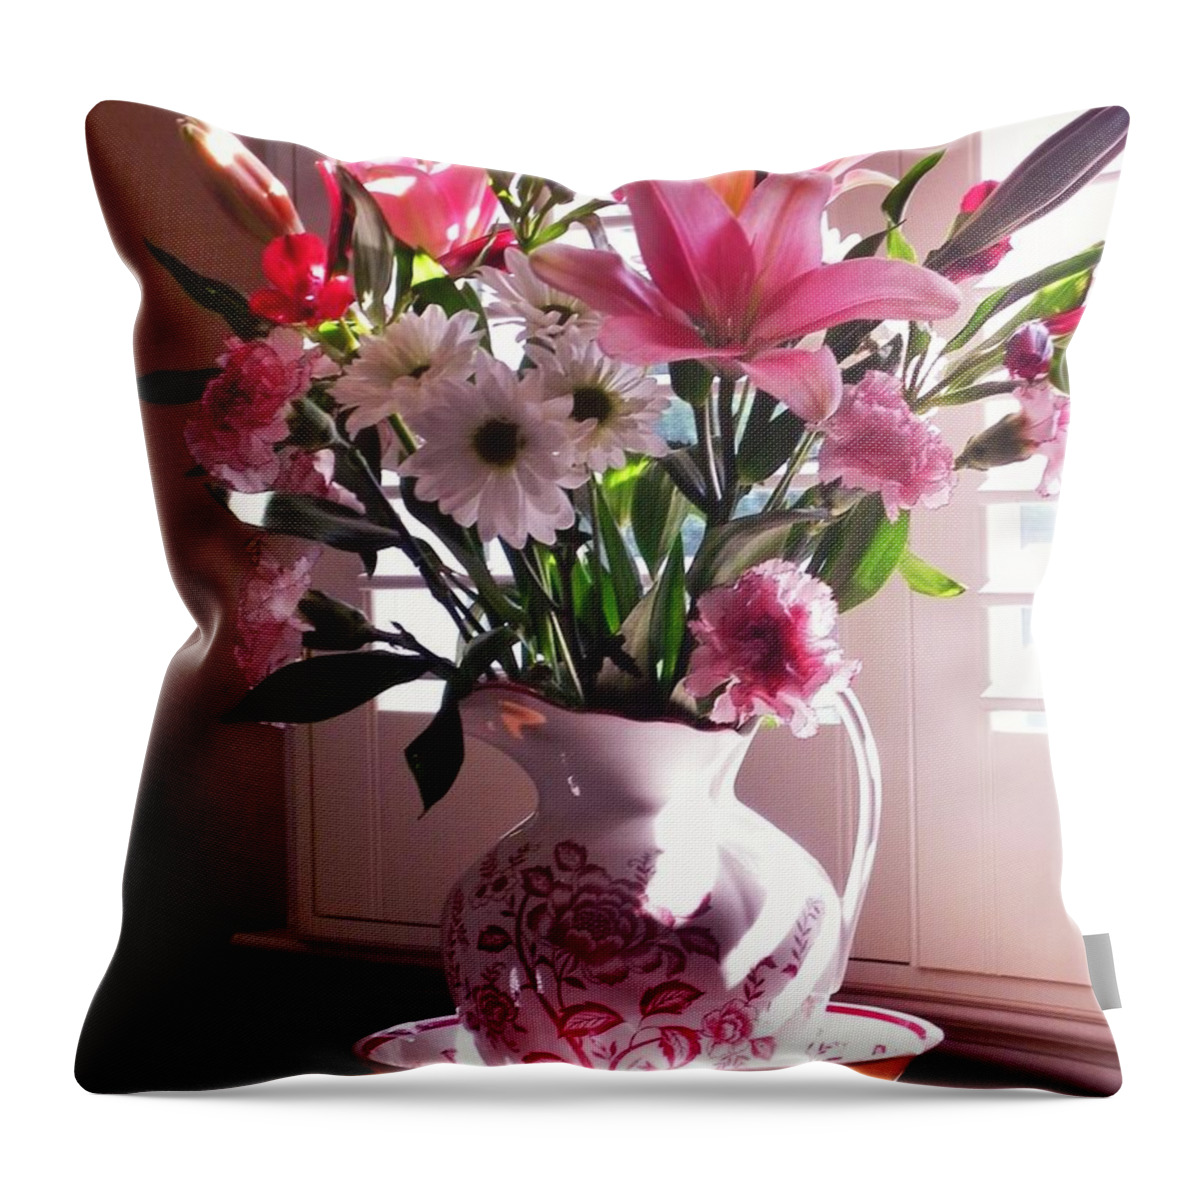 Flowers Throw Pillow featuring the photograph Another Grandma's Pitcher with Flowers by Patricia Greer